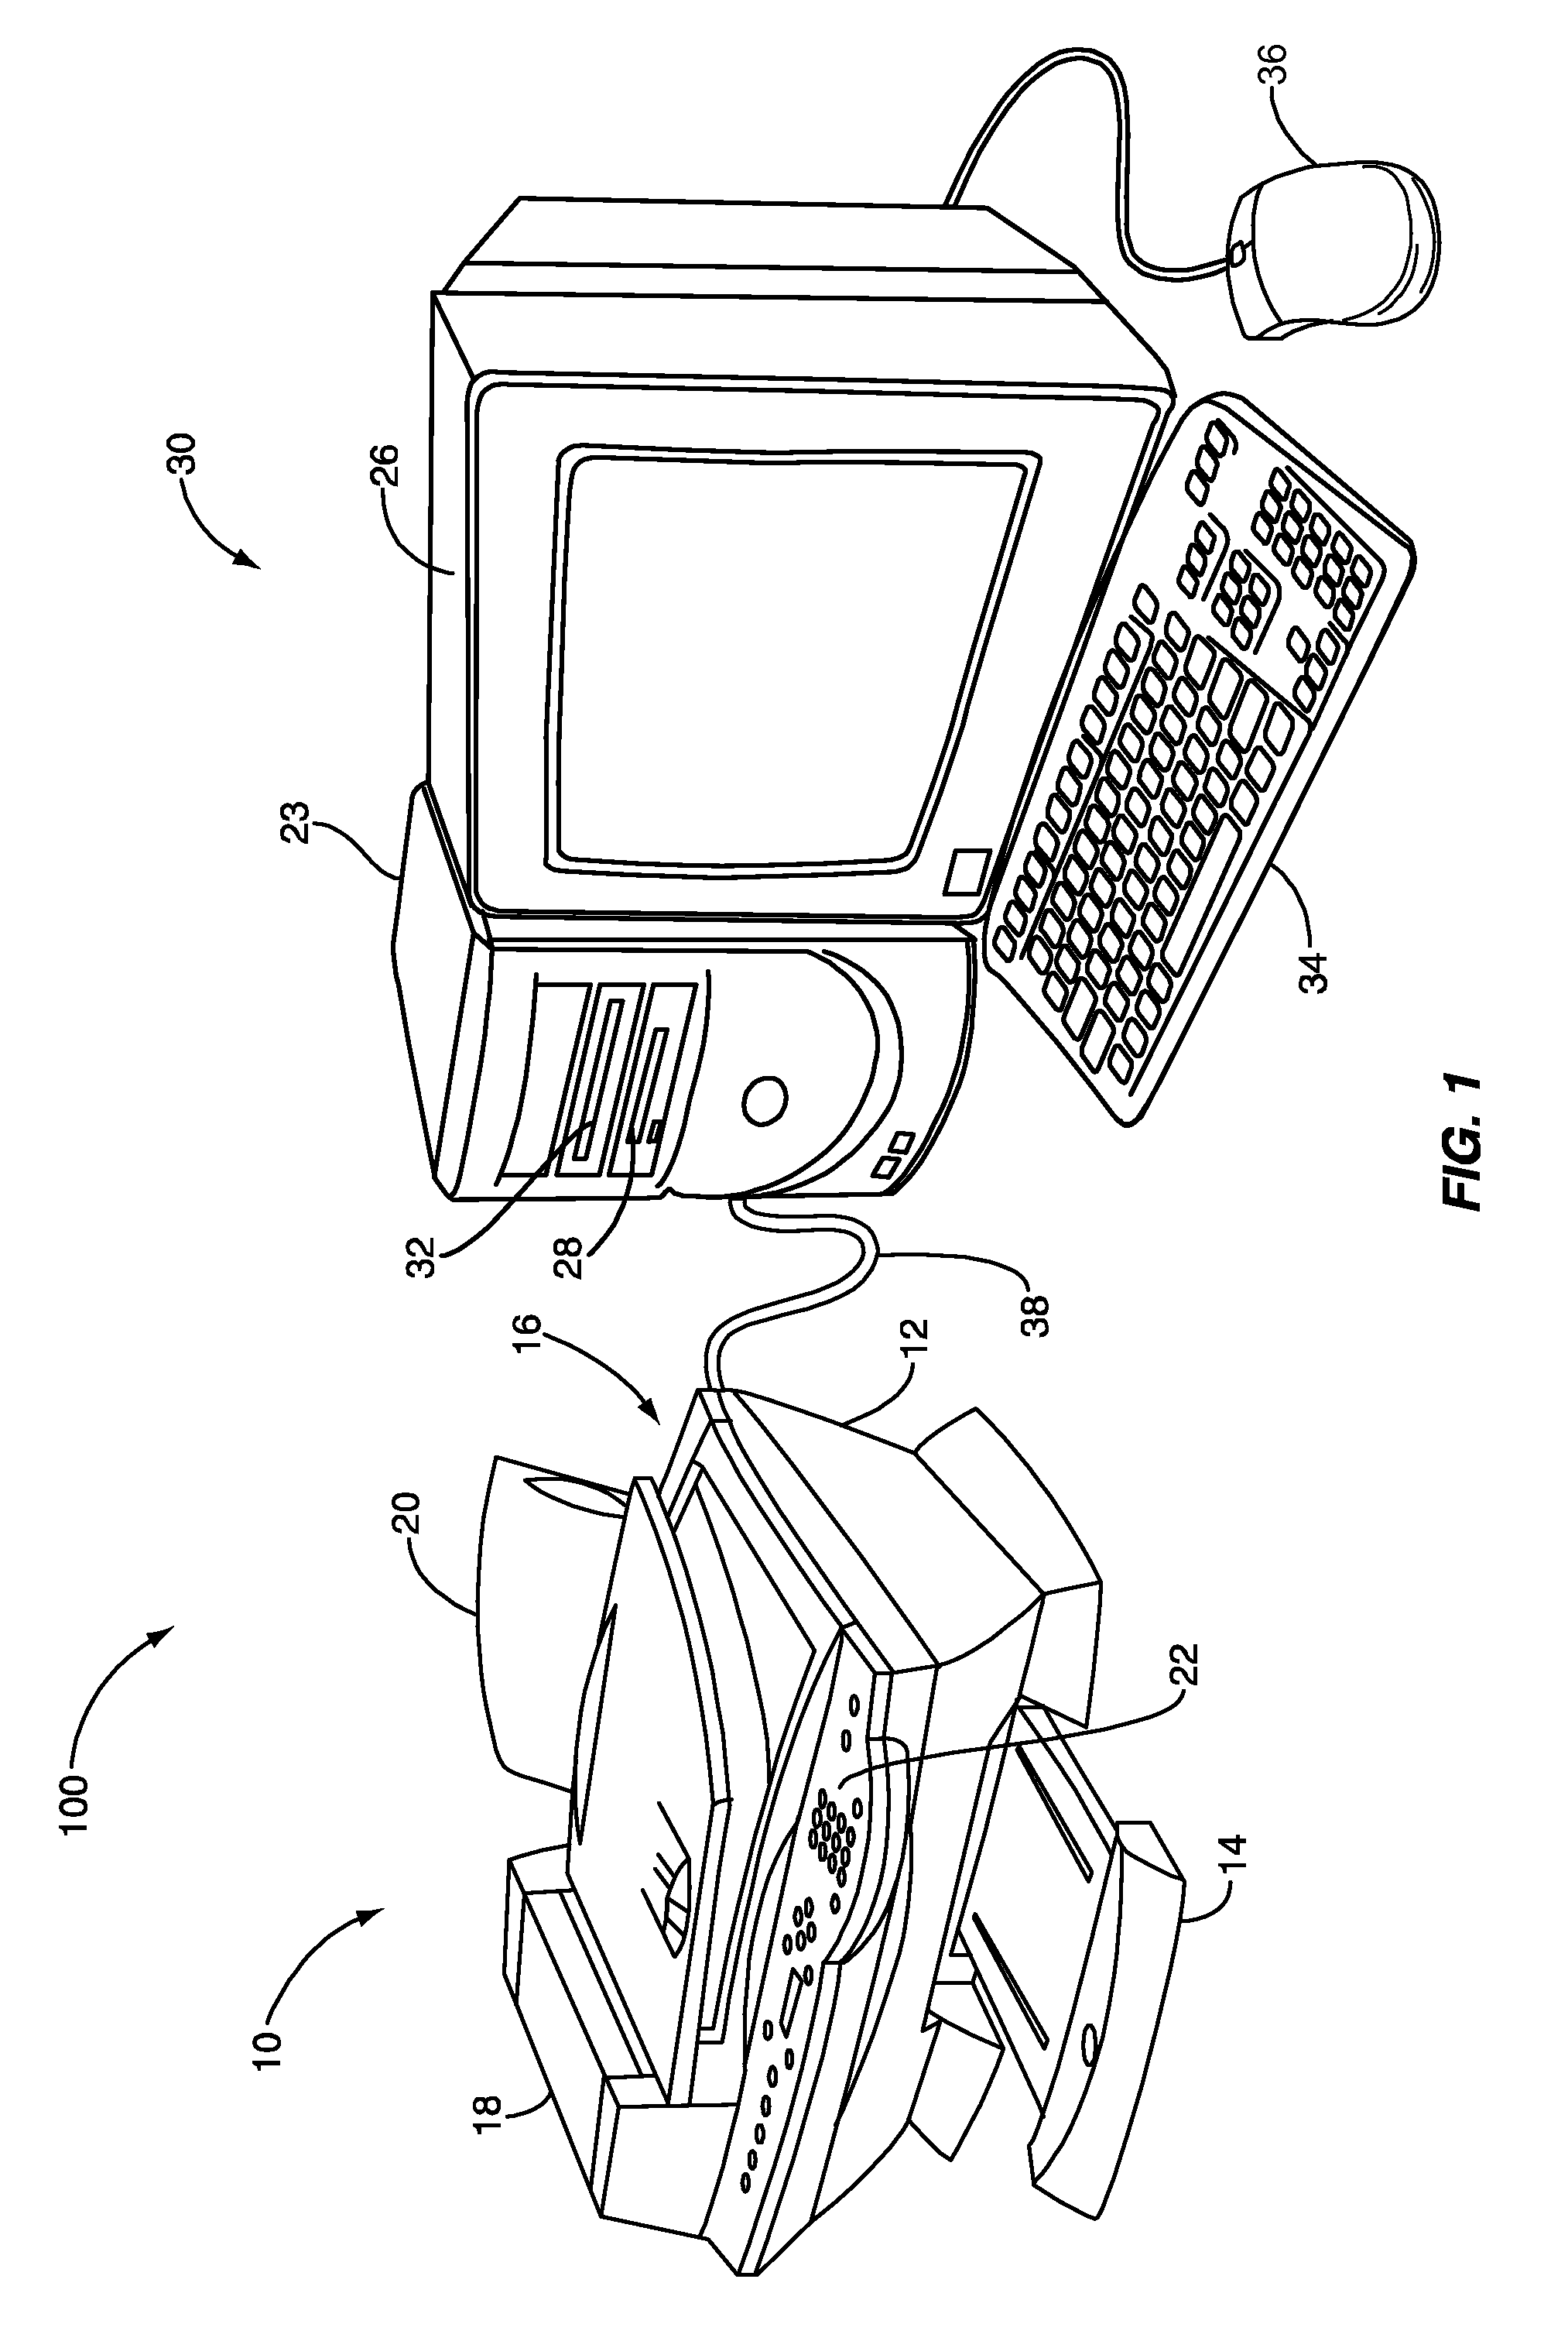 Halftone edge enhancement for production by an image forming device